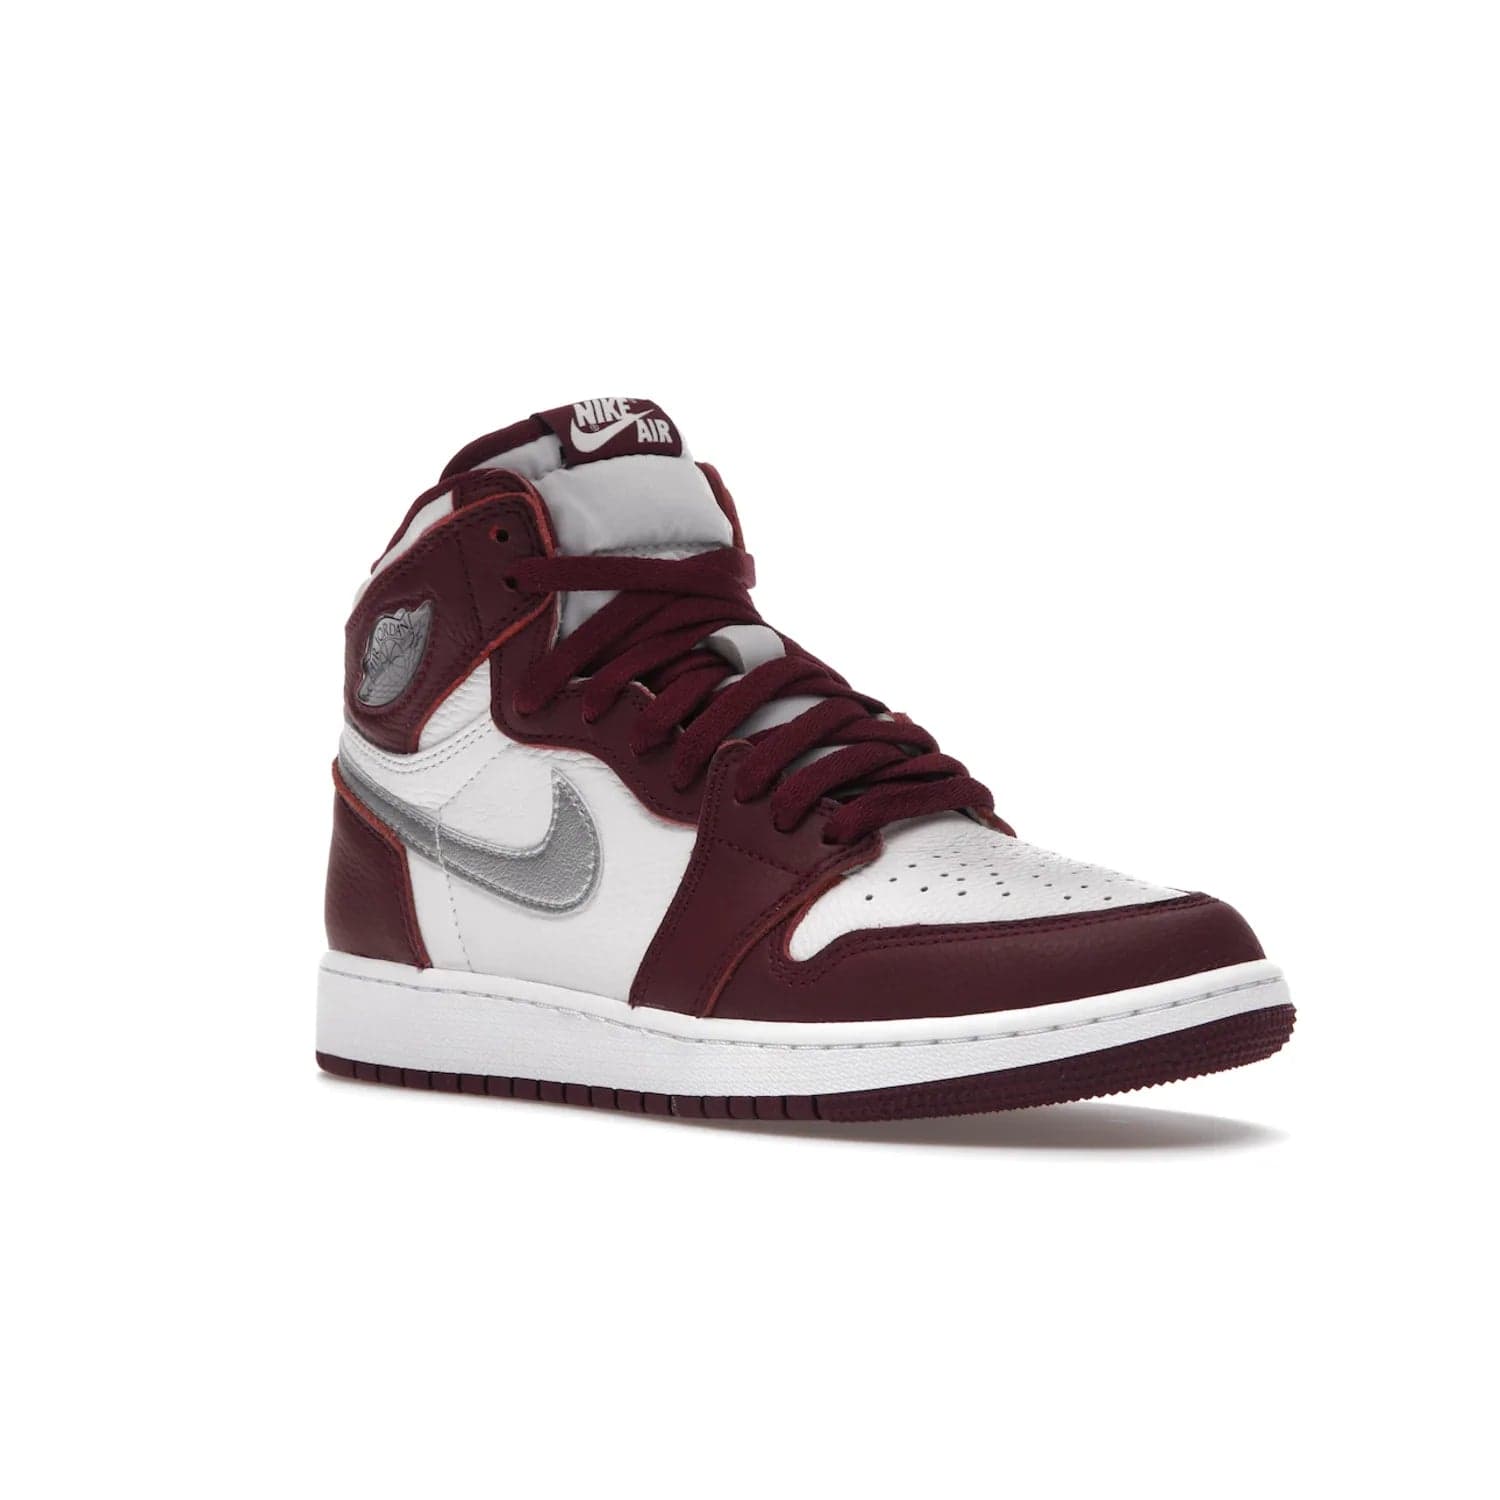 Jordan 1 Retro High OG Bordeaux (GS) - Image 5 - Only at www.BallersClubKickz.com - #
Introducing the Air Jordan 1 Retro High OG Bordeaux GS – a signature colorway part of the Jordan Brand Fall 2021 lineup. White leather upper & Bordeaux overlays, metallic silver swoosh, jeweled Air Jordan Wings logo & more. Step up your style game with this sleek fall season silhouette.